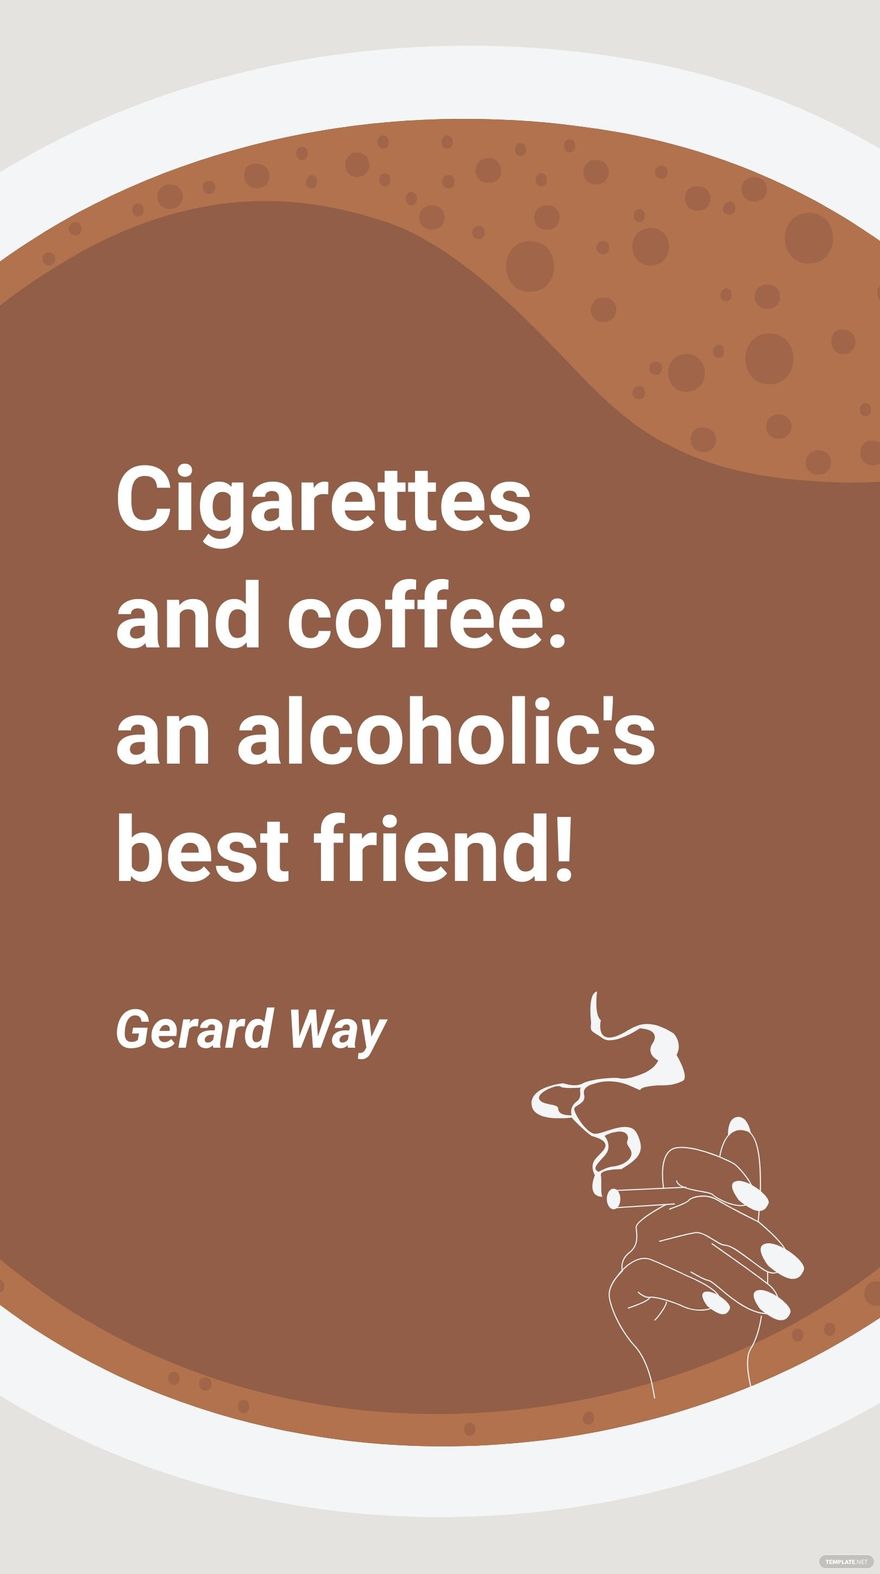 Gerard Way - Cigarettes and coffee: an alcoholic's best friend!